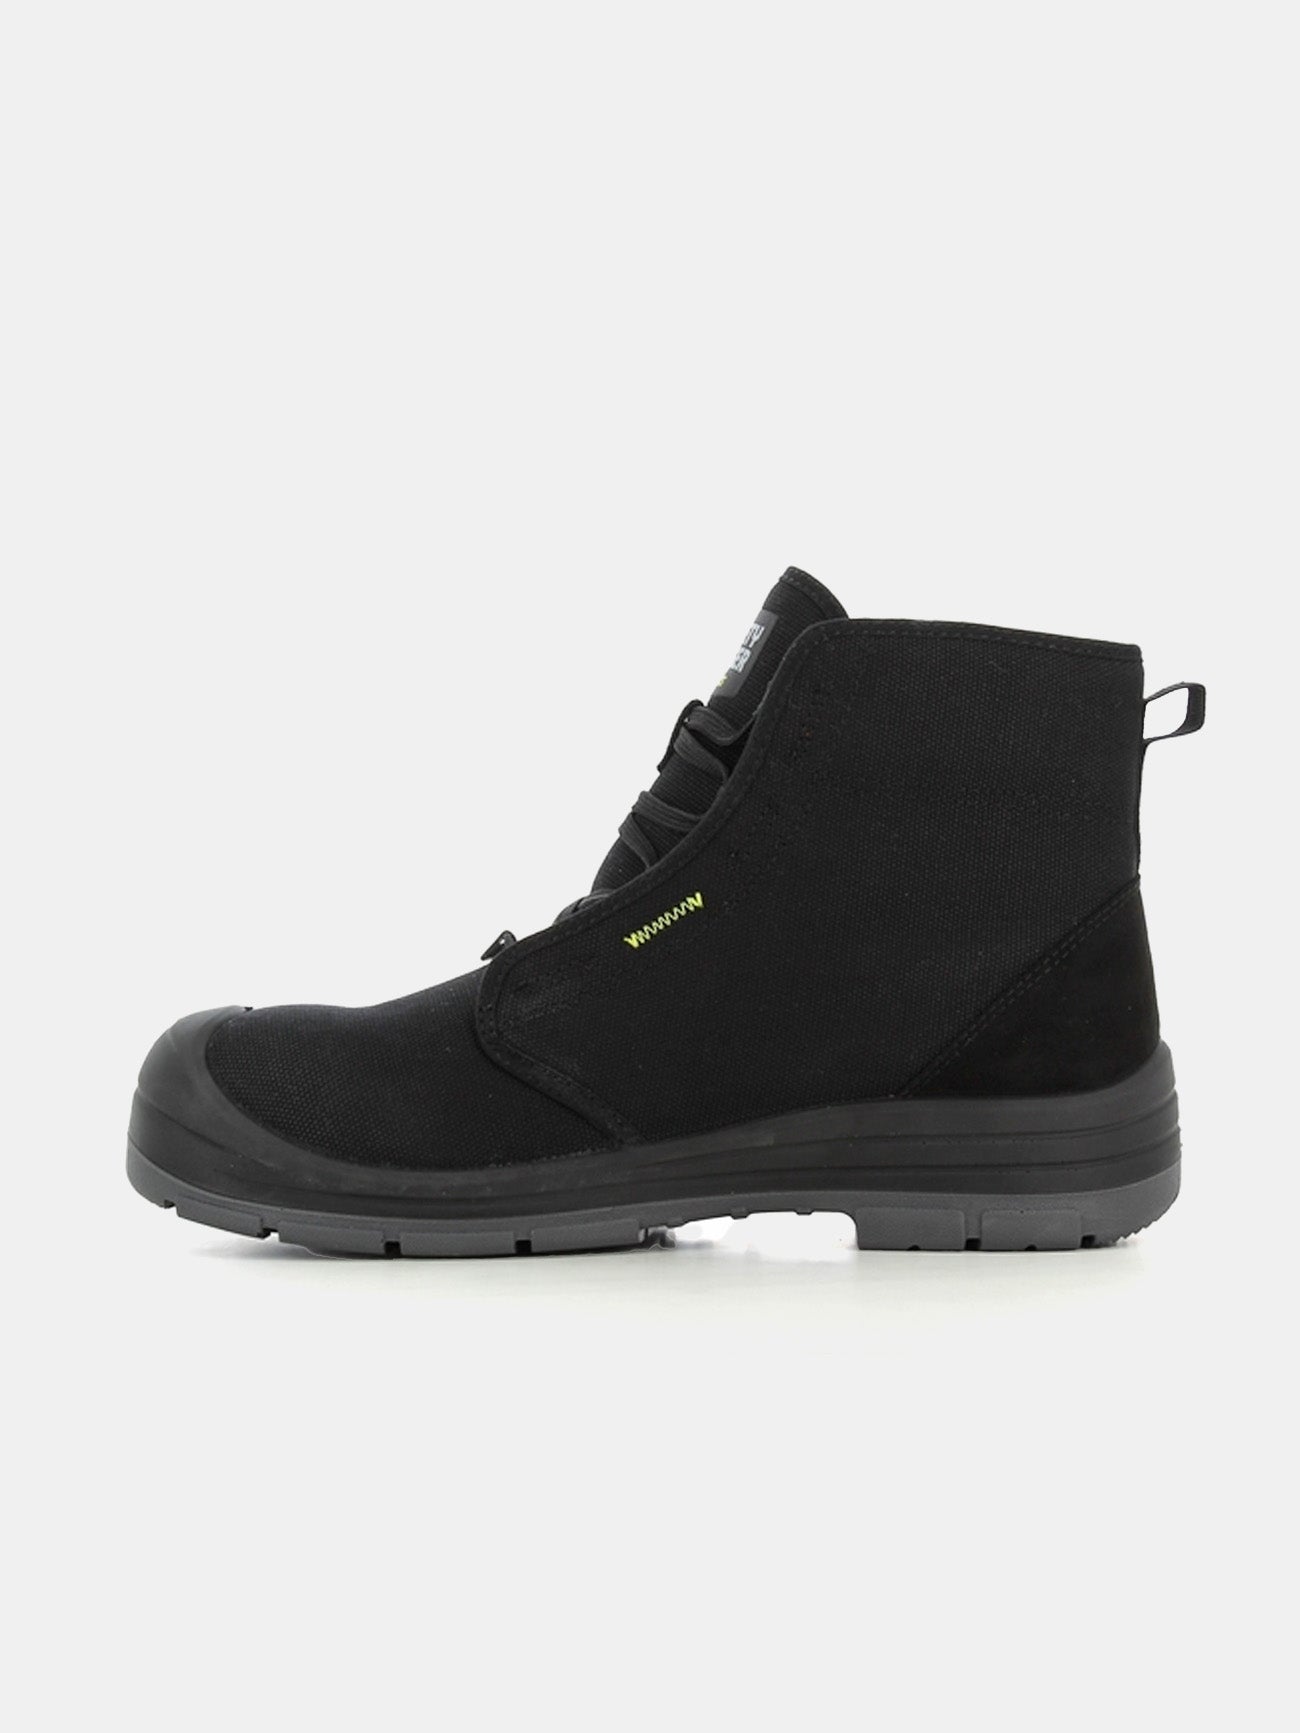 Safety Jogger Men's Ecodesert S1P Mid Boots